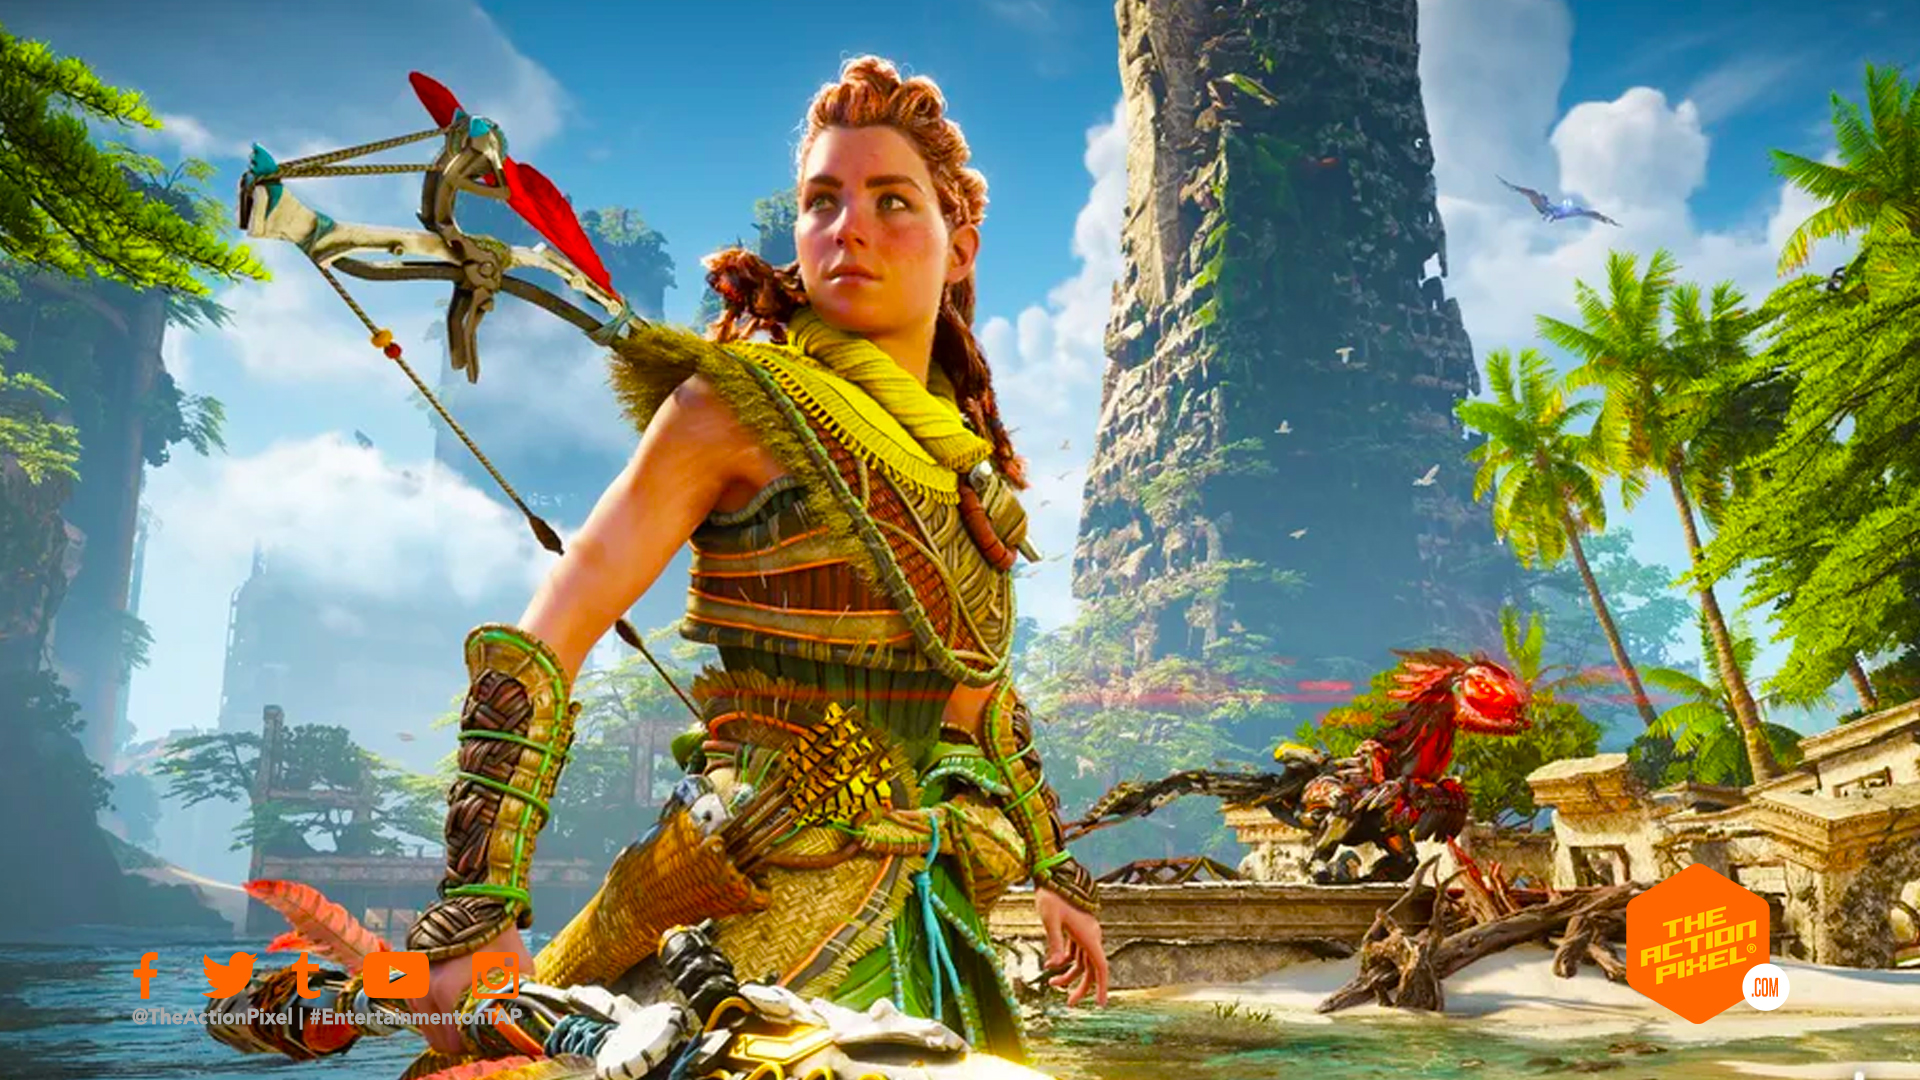 horizon forbidden west, aloy, the action pixel, gaming news, featured , entertainment on tap, playstation 5, ps5 capture, ps5, horizon zero dawn sequel, horizon 2, horizon forbidden west gameplay, the action pixel, entertainment on tap,